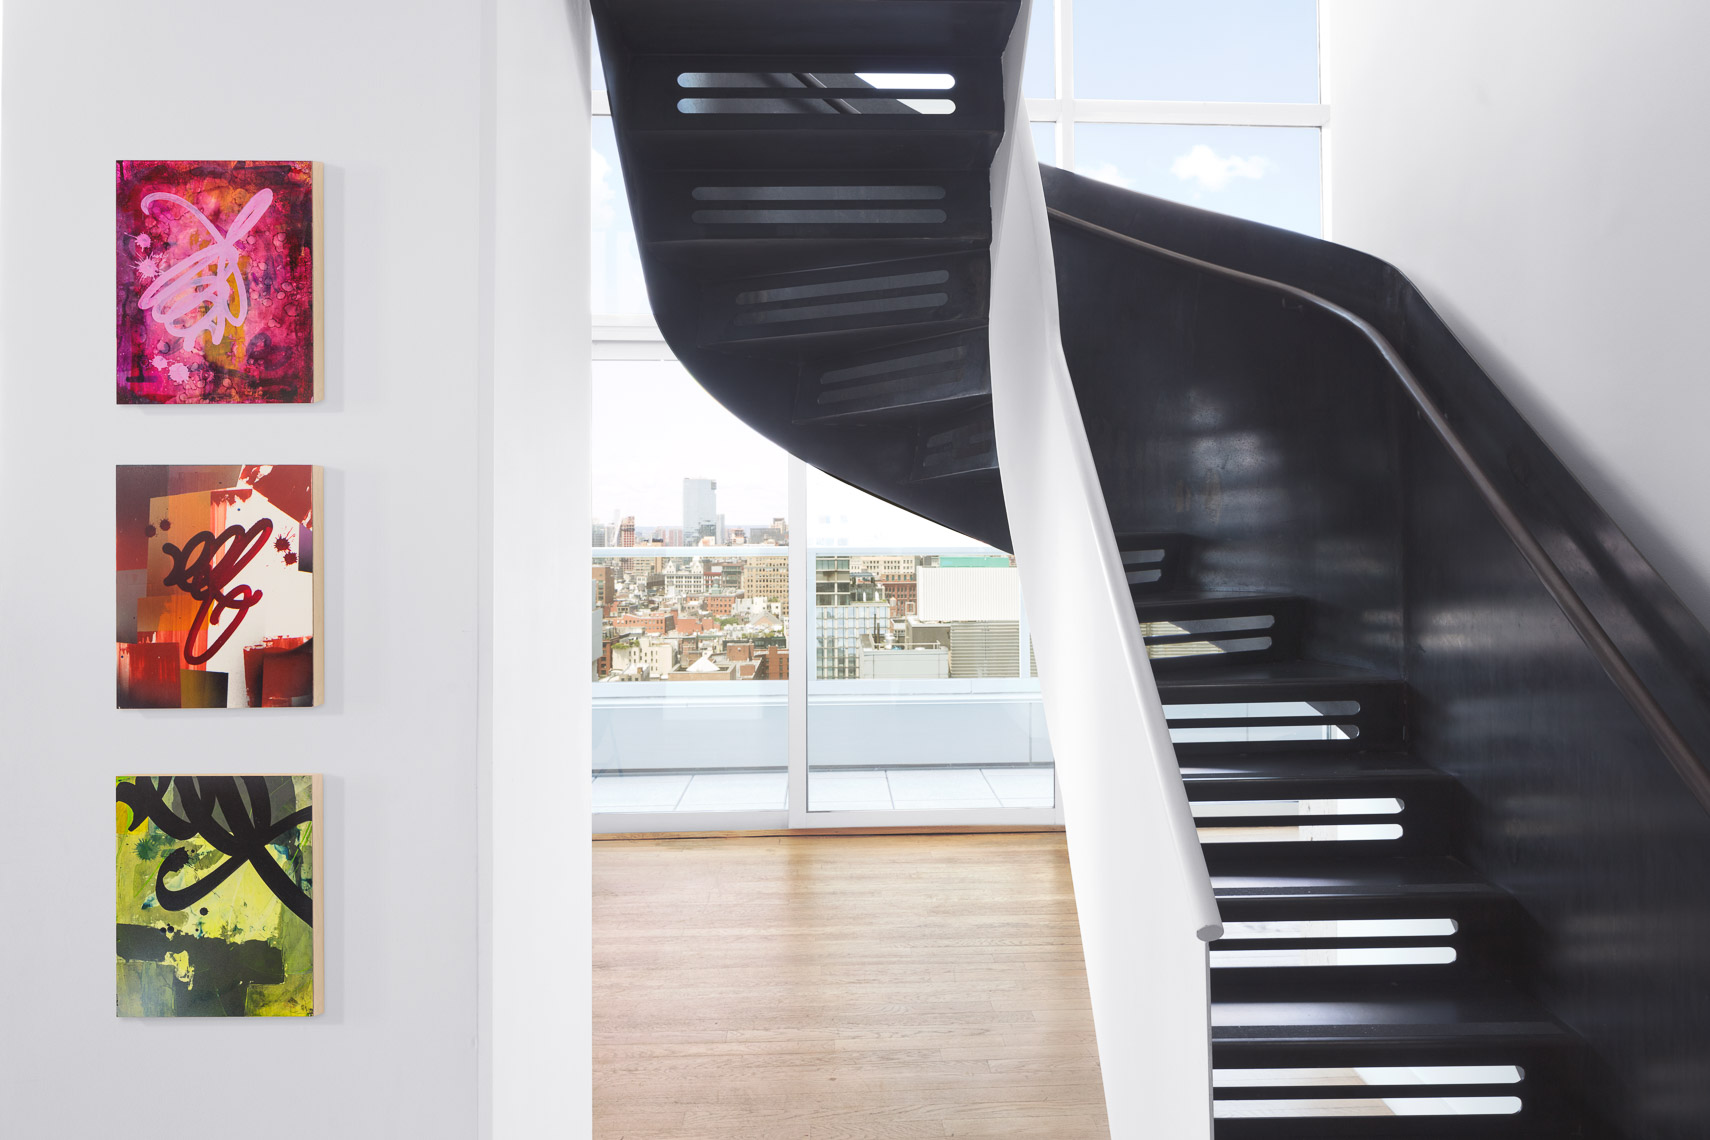 Curved metal staircase and graffiti artwork in hotel room with panoramic city views